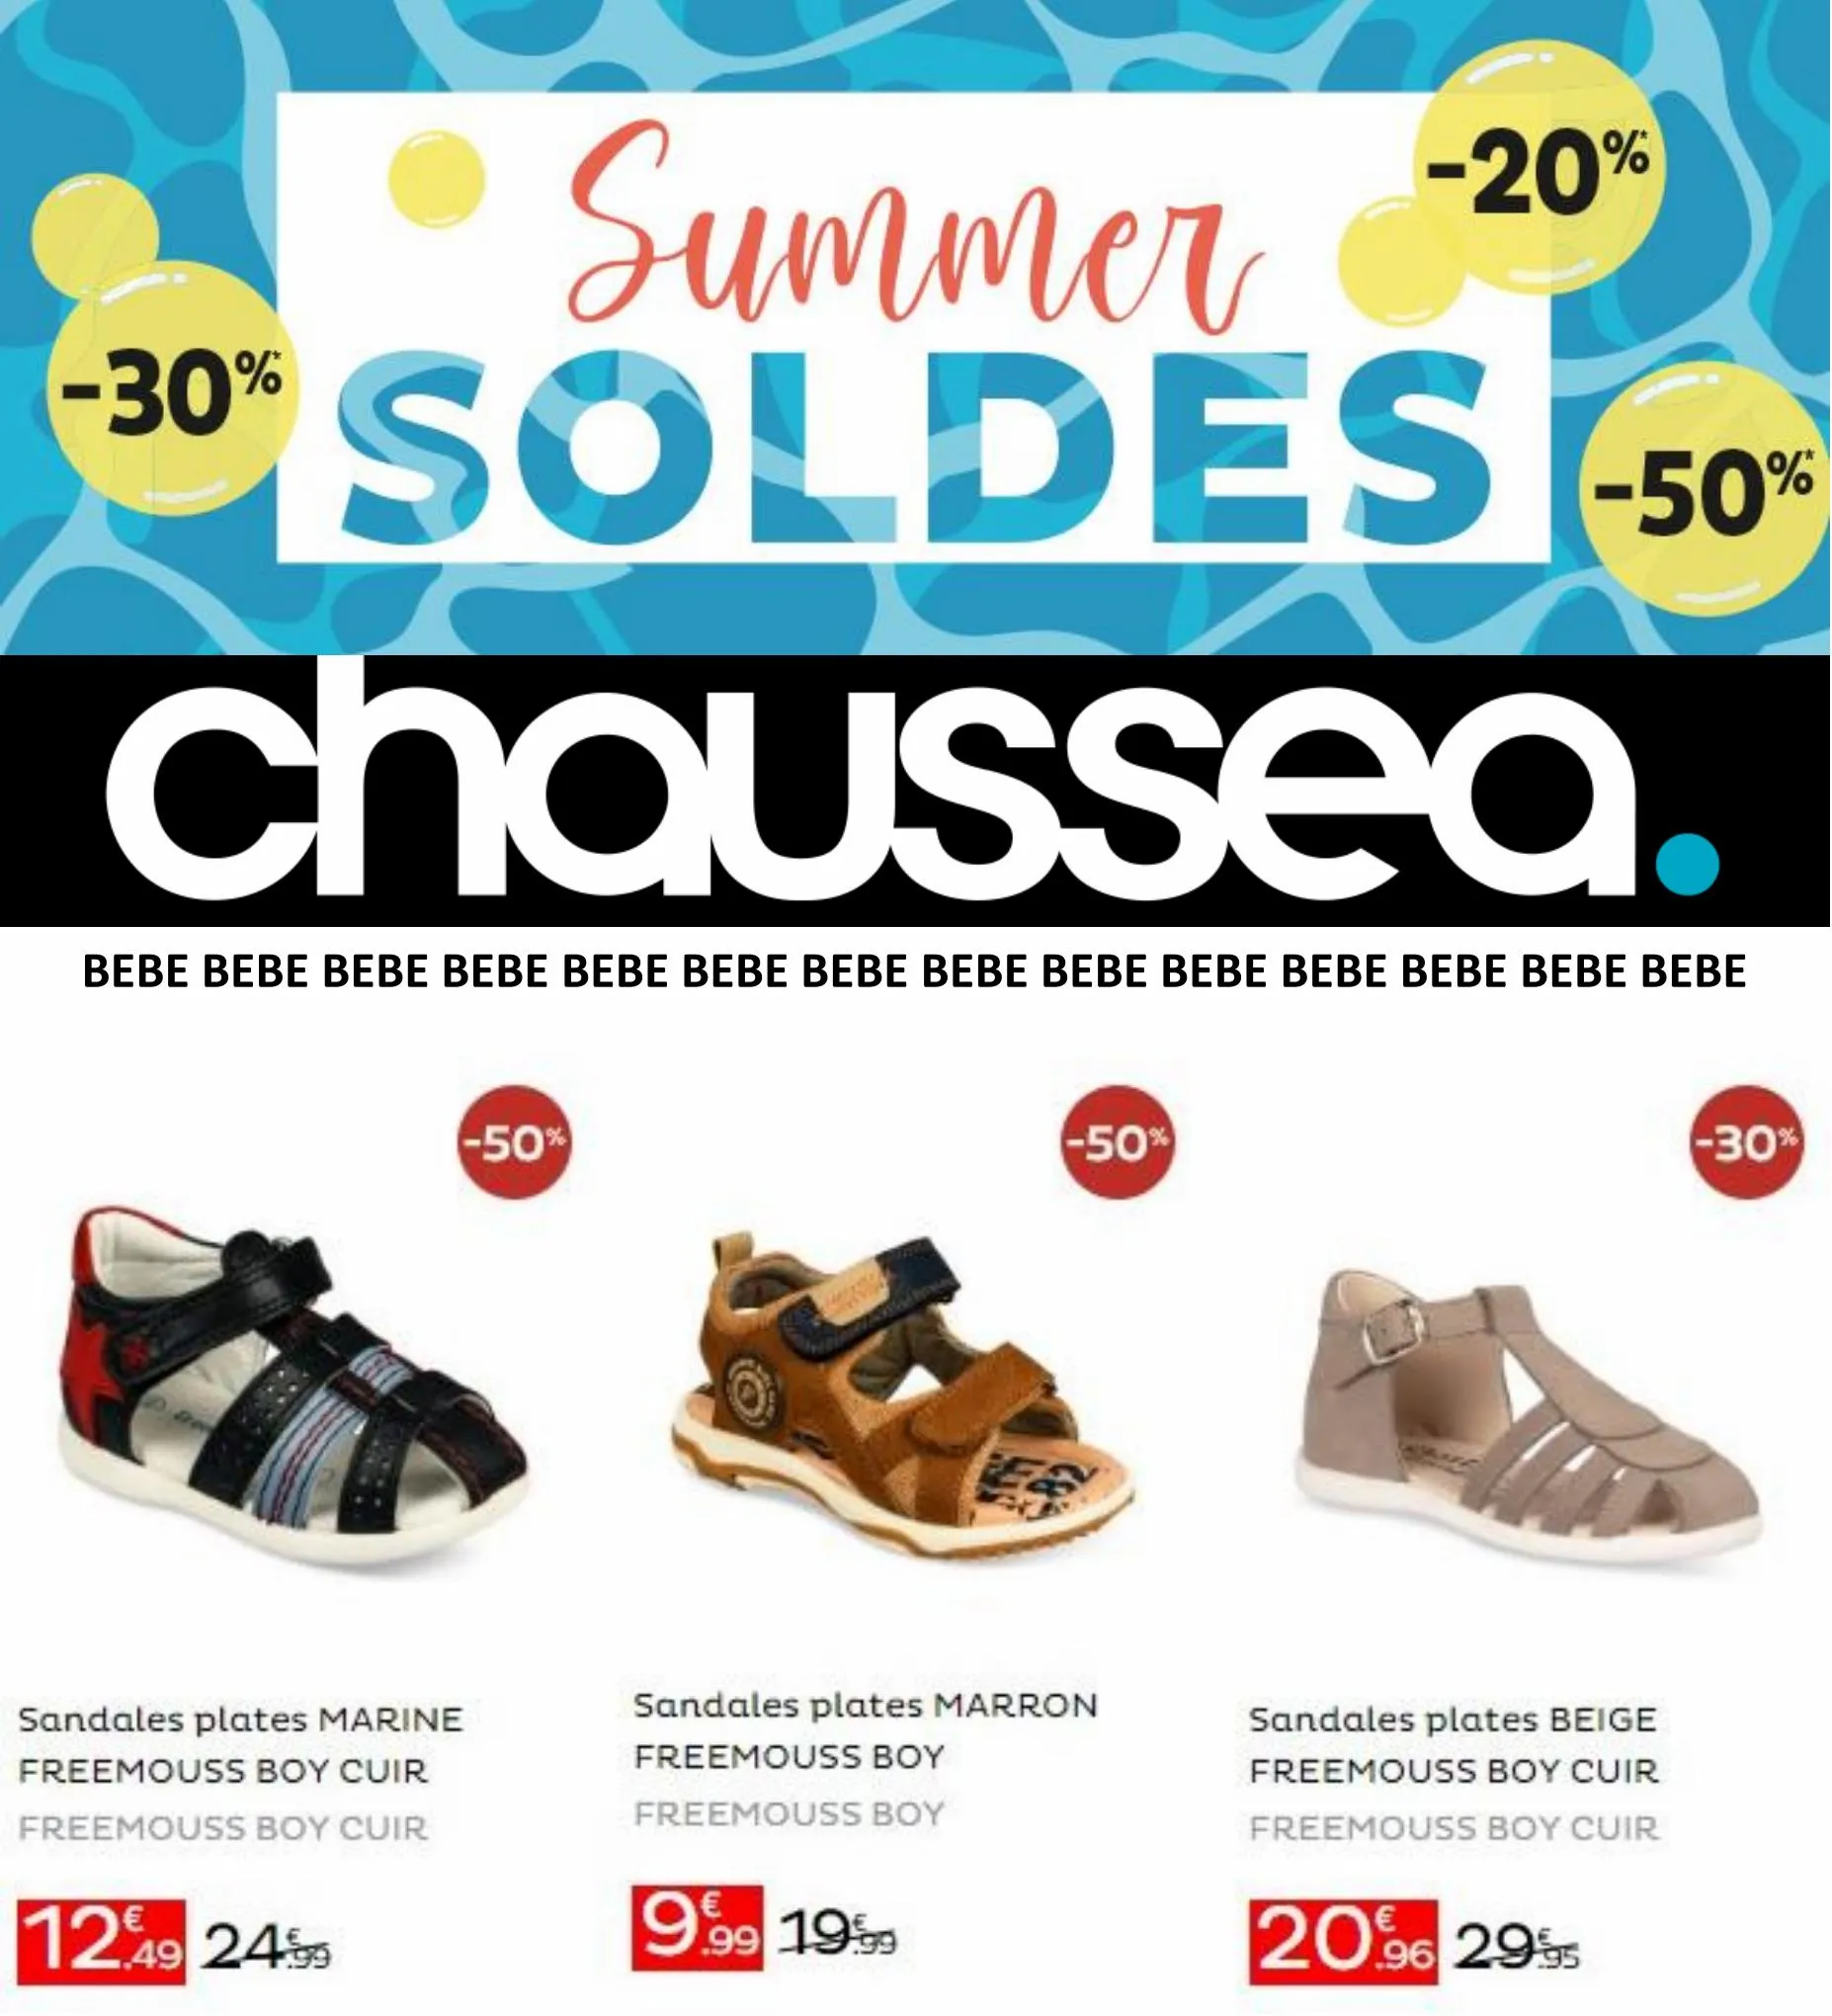 Catalogue SOLDES BEBE, page 00001